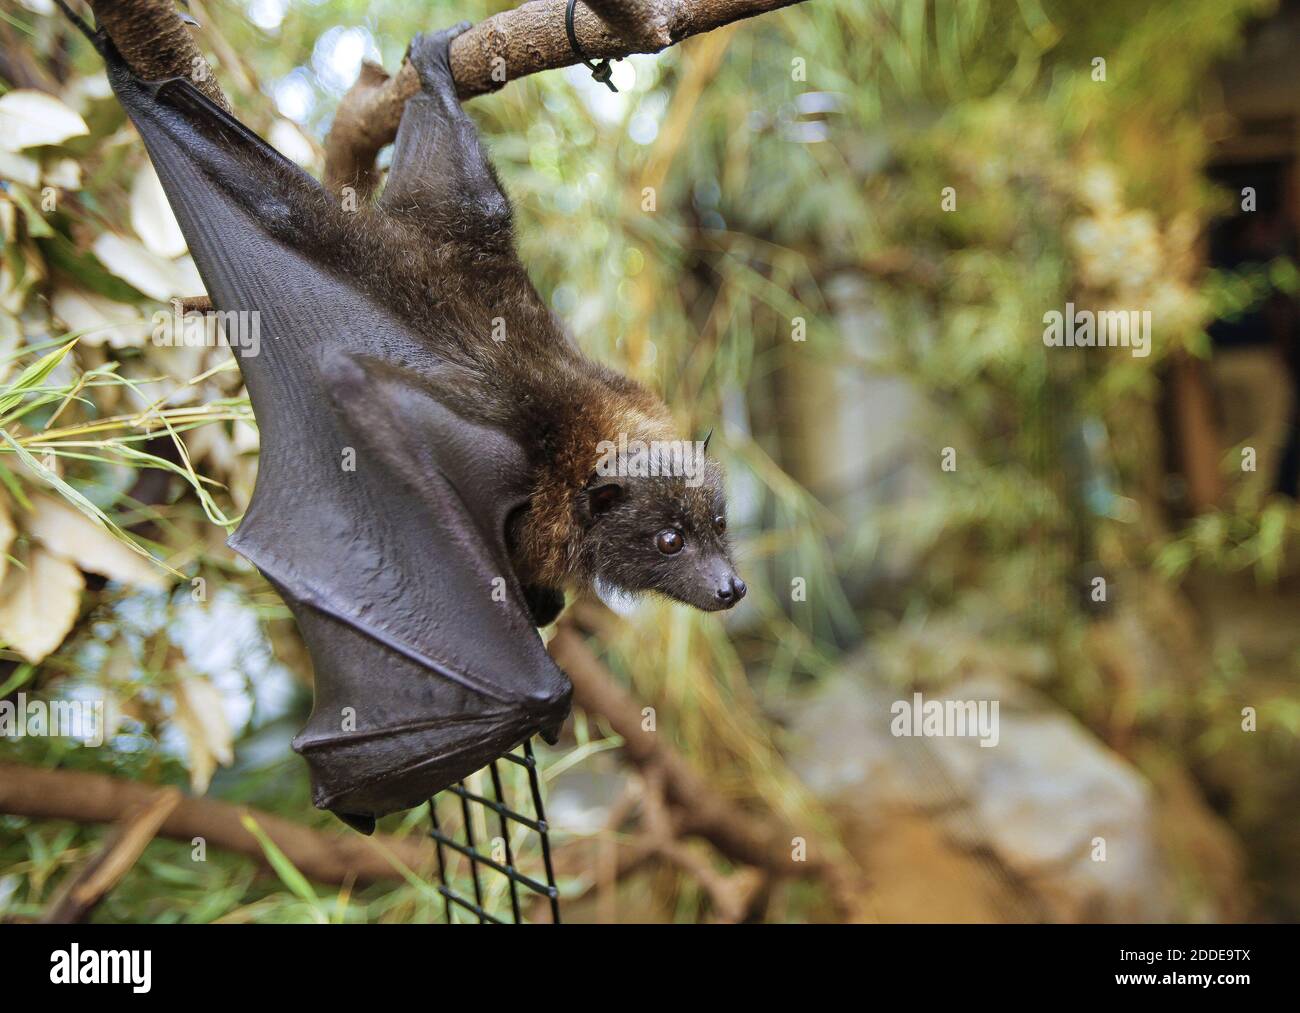 NO FILM, NO VIDEO, NO TV, NO DOCUMENTARY - At a little more than five  months, "Lucas" spent short periods of time in the main bat population at  the Bat House, part